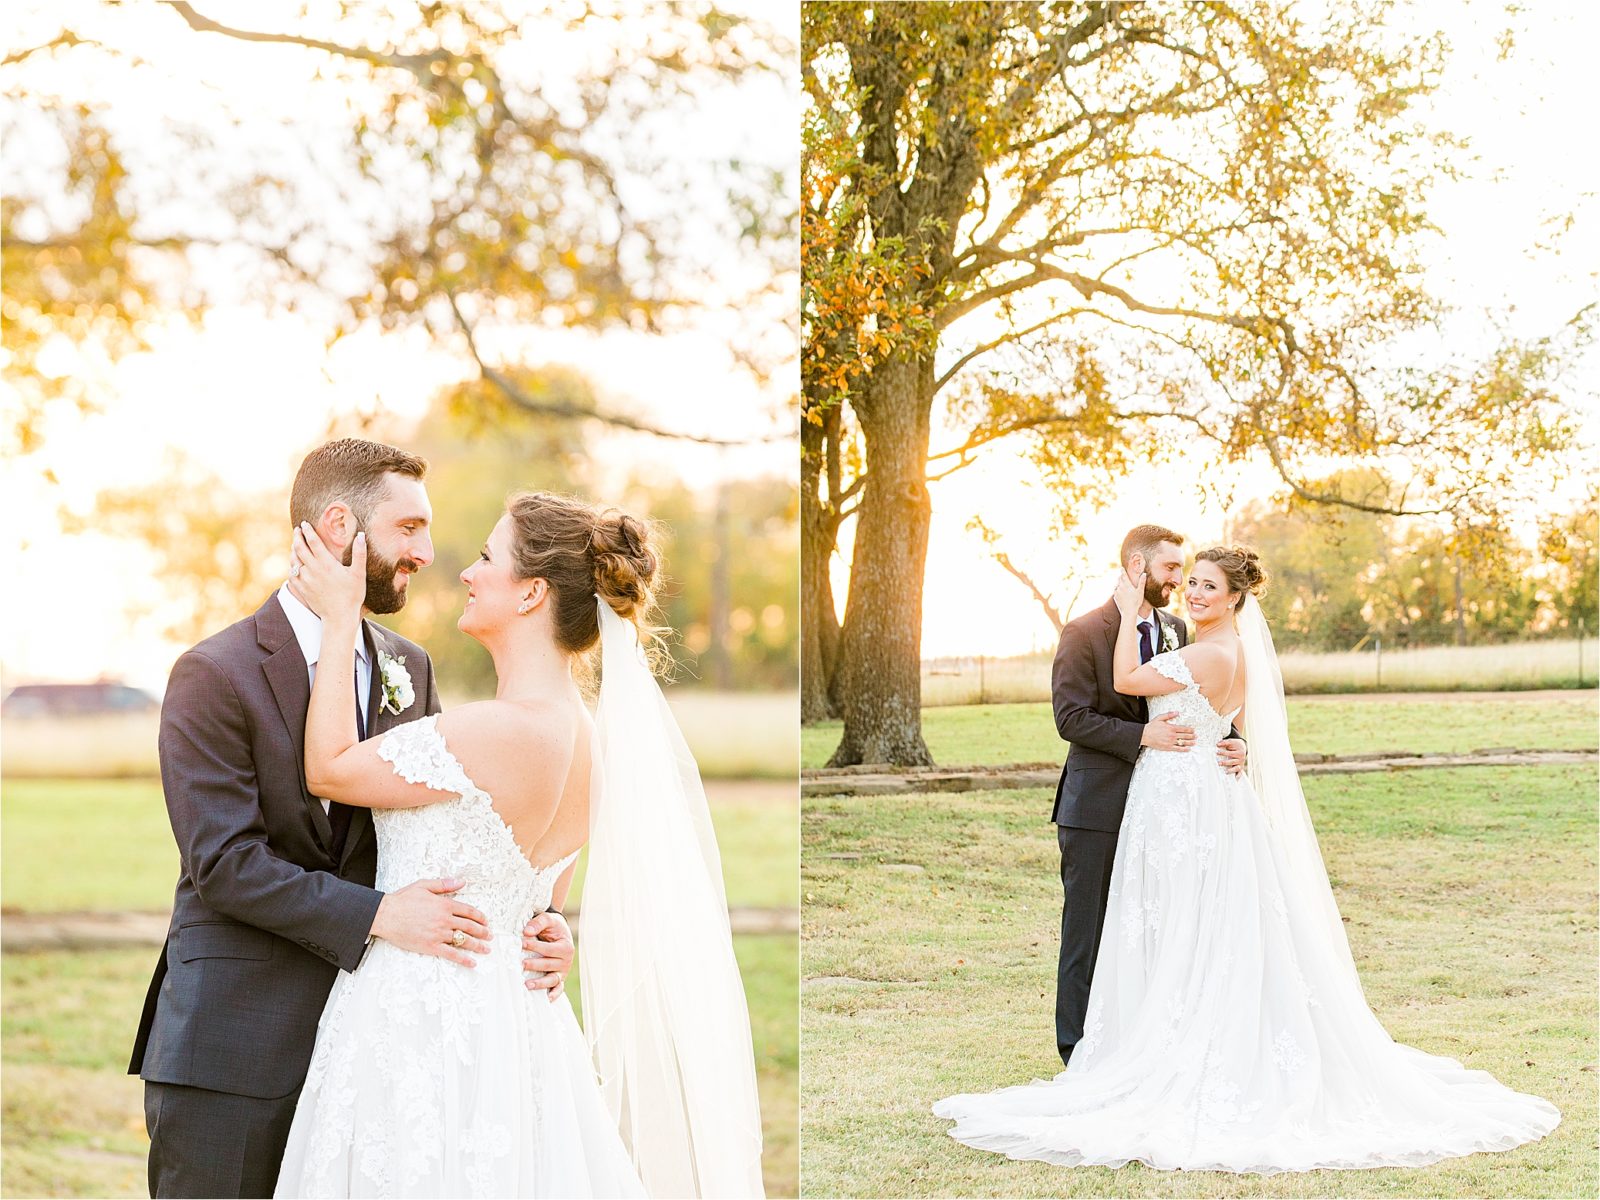 A groom holds his bride around her waist as she peeks back at the camera during their sunset newlywed portraits at Rustic Grace Estate by Jillian Hogan Photography 